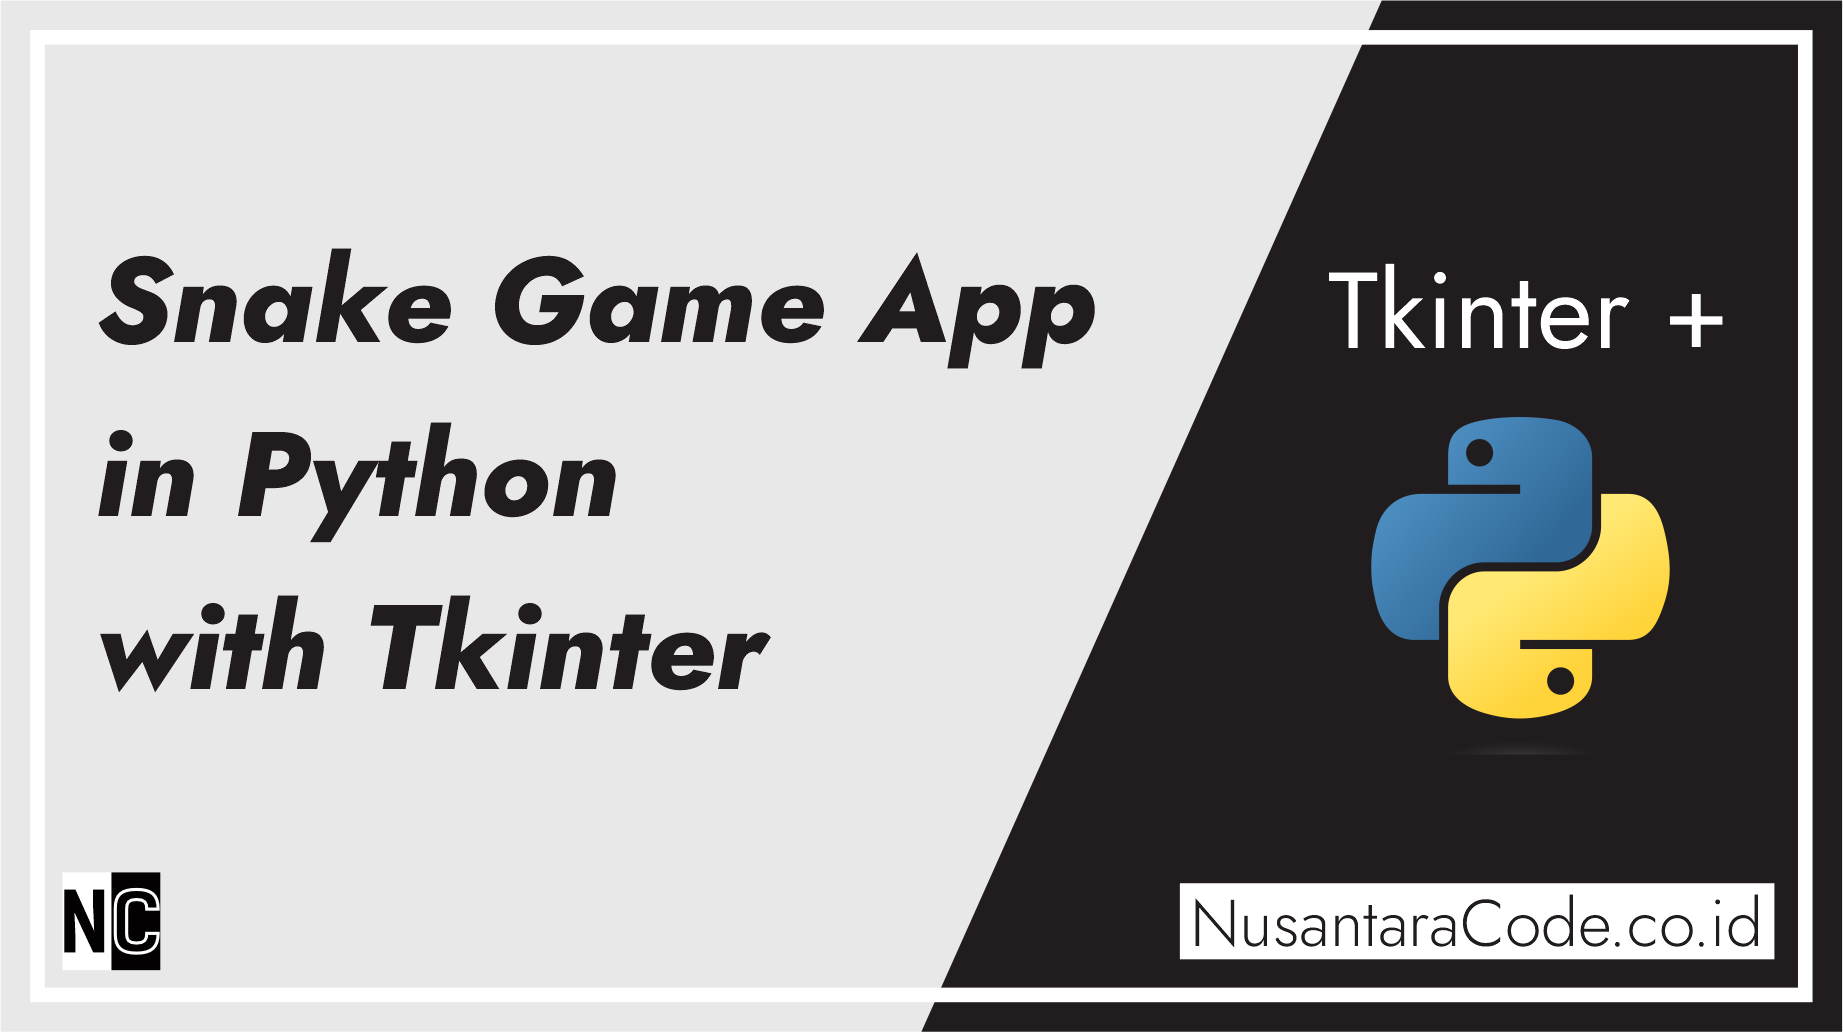 Building a Snake Game App in Python with Tkinter